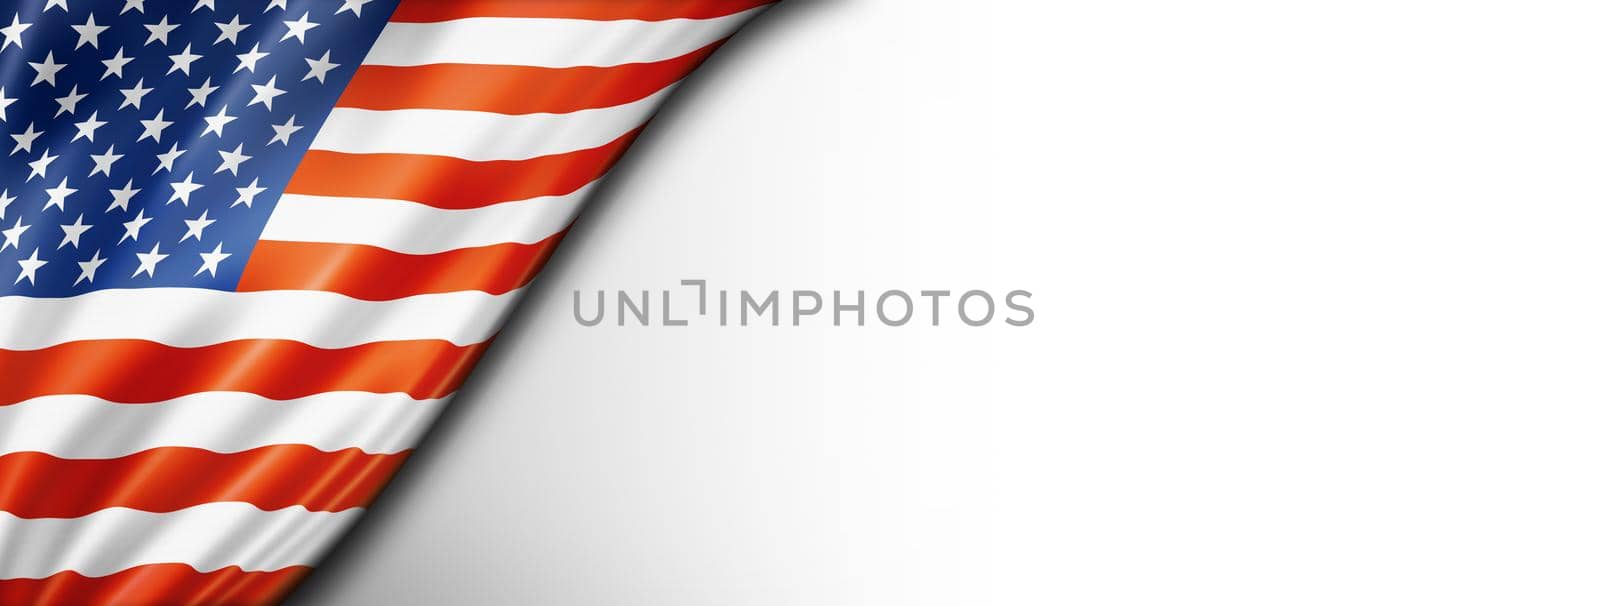 United States flag isolated on white banner by daboost